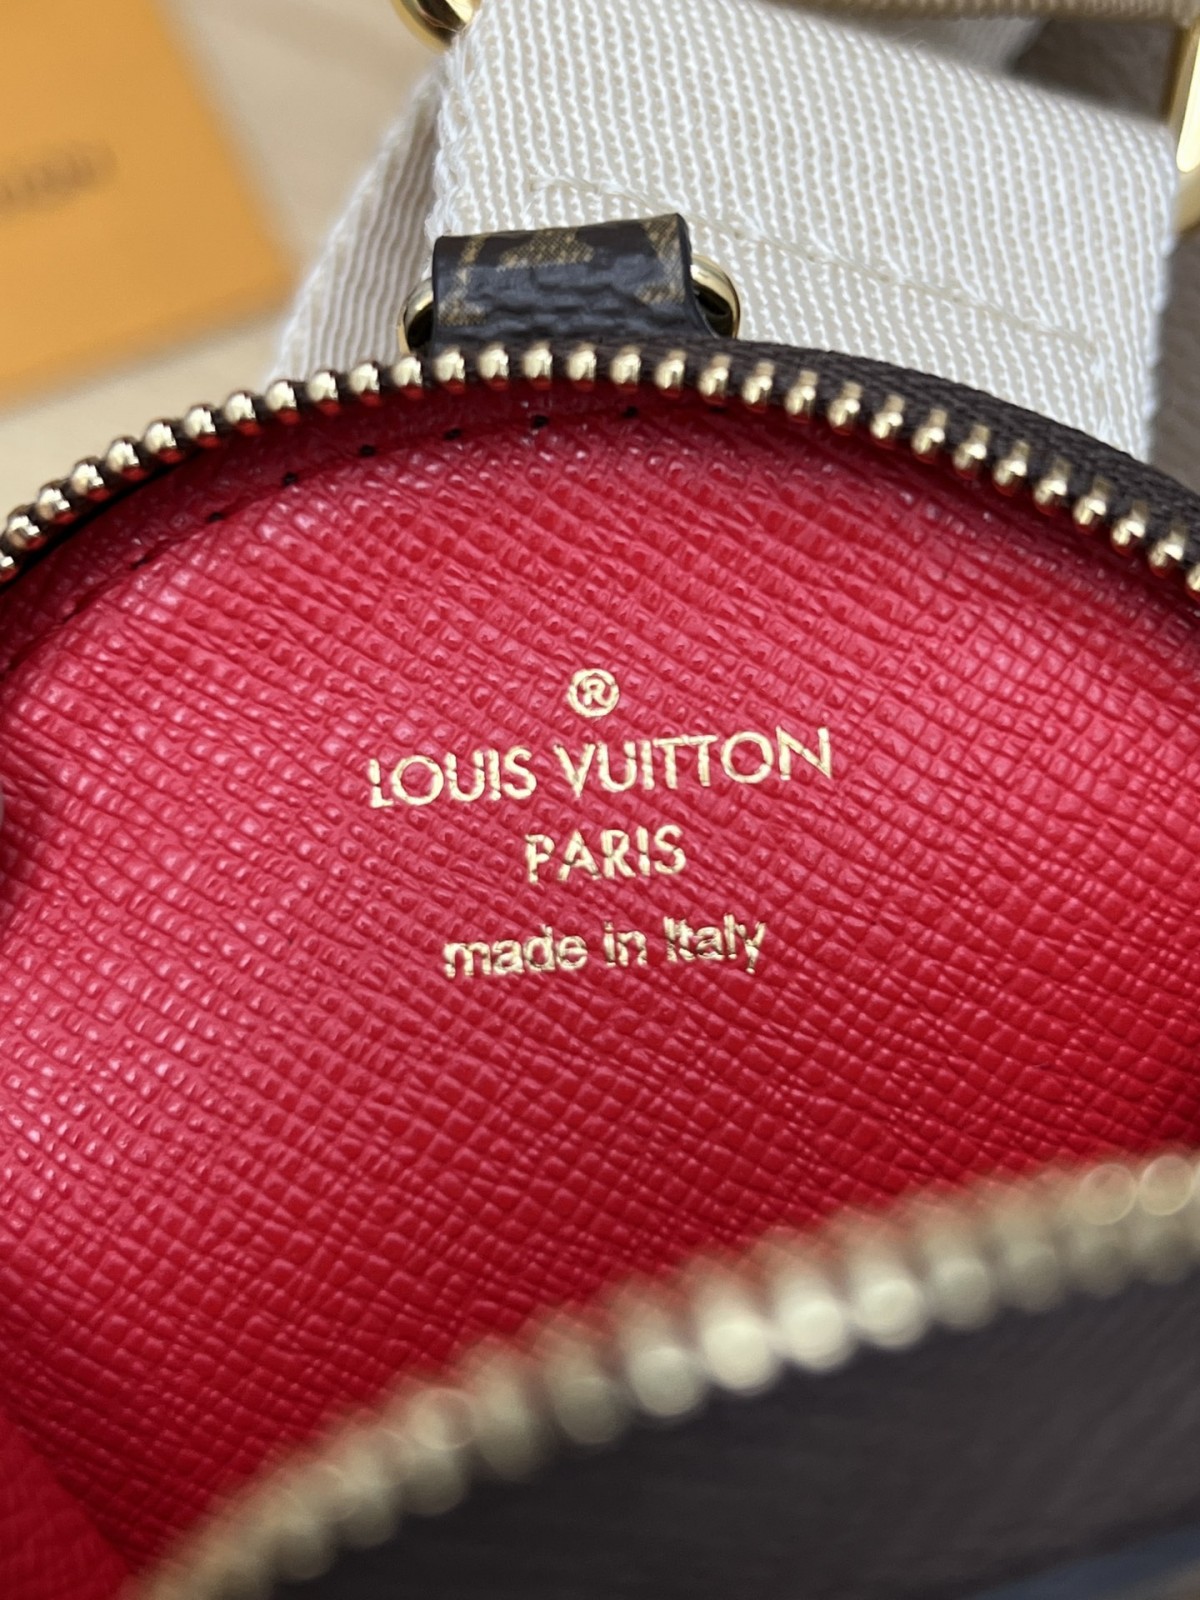 How good quality is a Shebag M46373 ONTHEGO small size?(2023 style with wide shoulder straps)-Best Quality Fake Louis Vuitton сумка онлайн дүкөнү, Replica дизайнер сумка ru